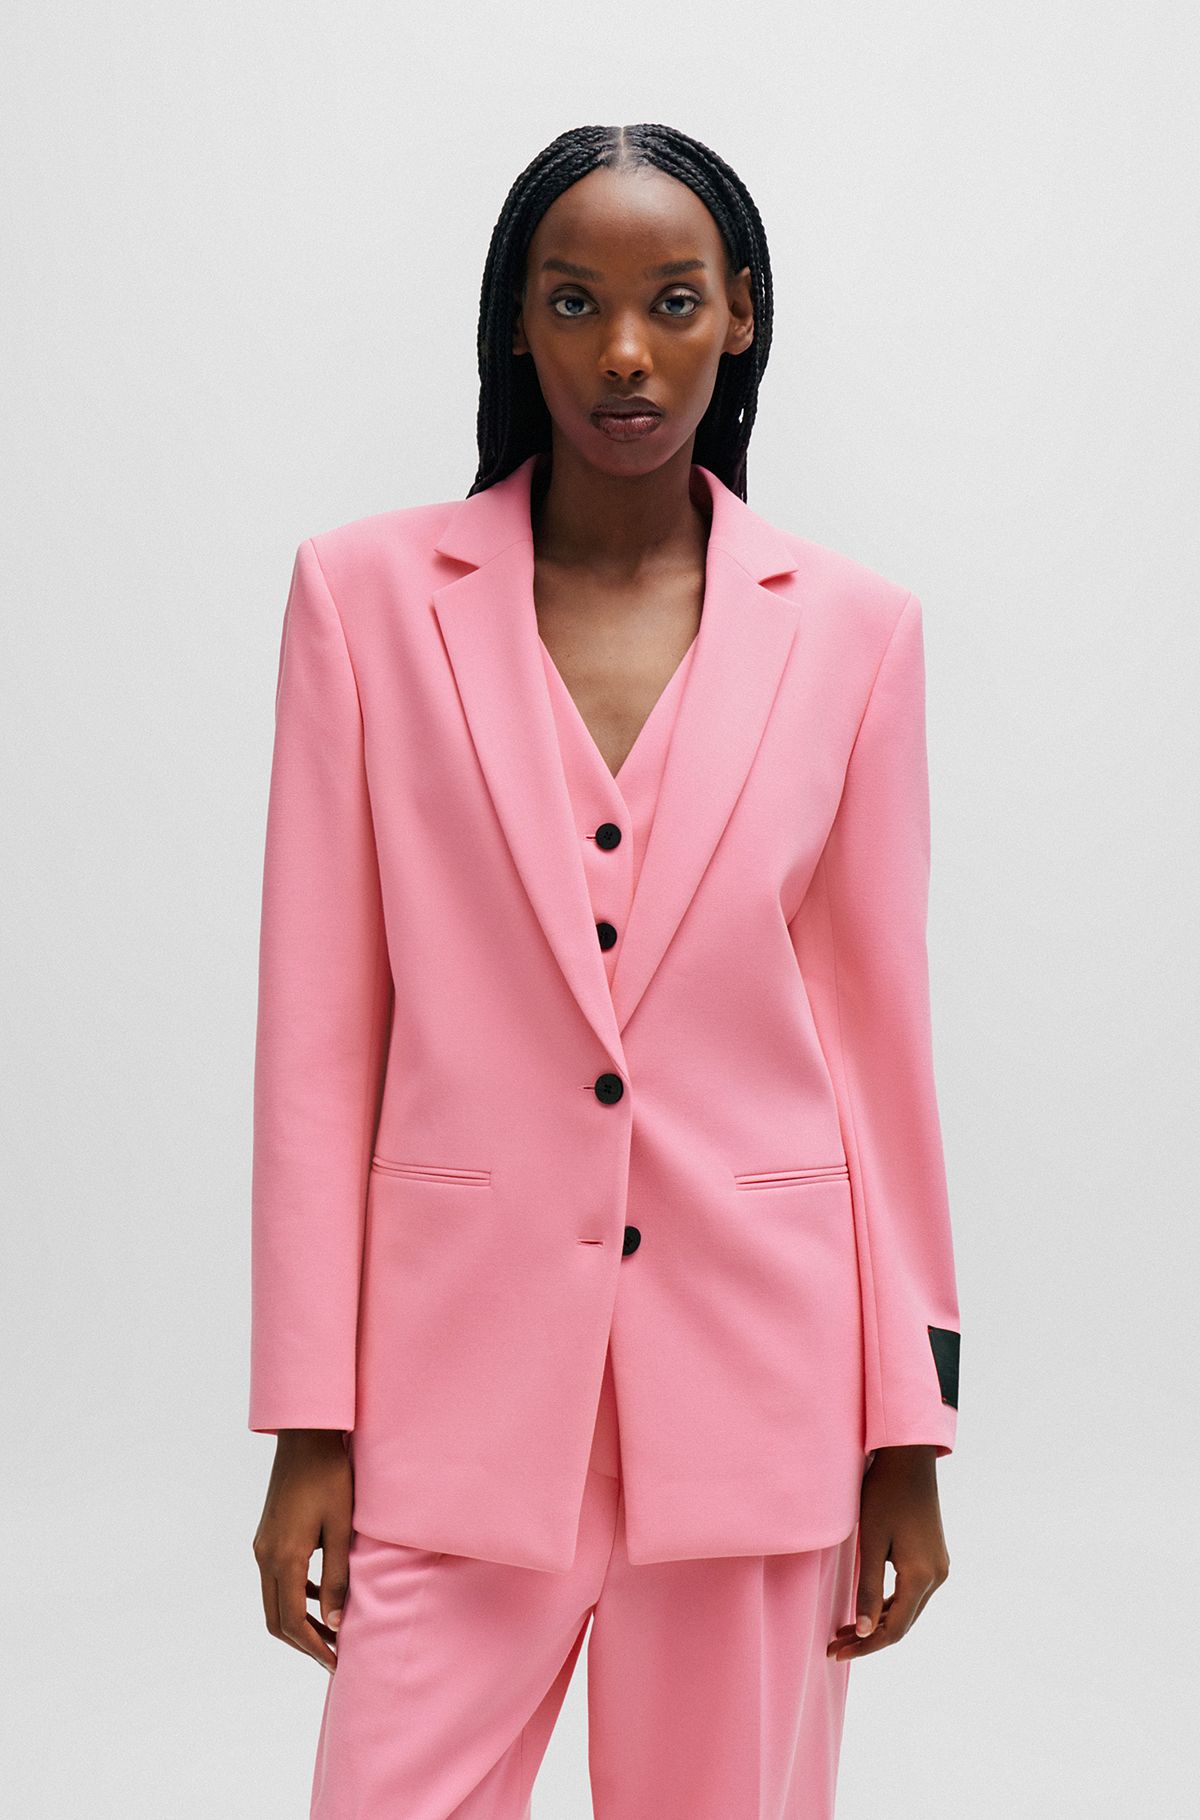 Pant Suits & Skirt Suits in Pink by HUGO BOSS